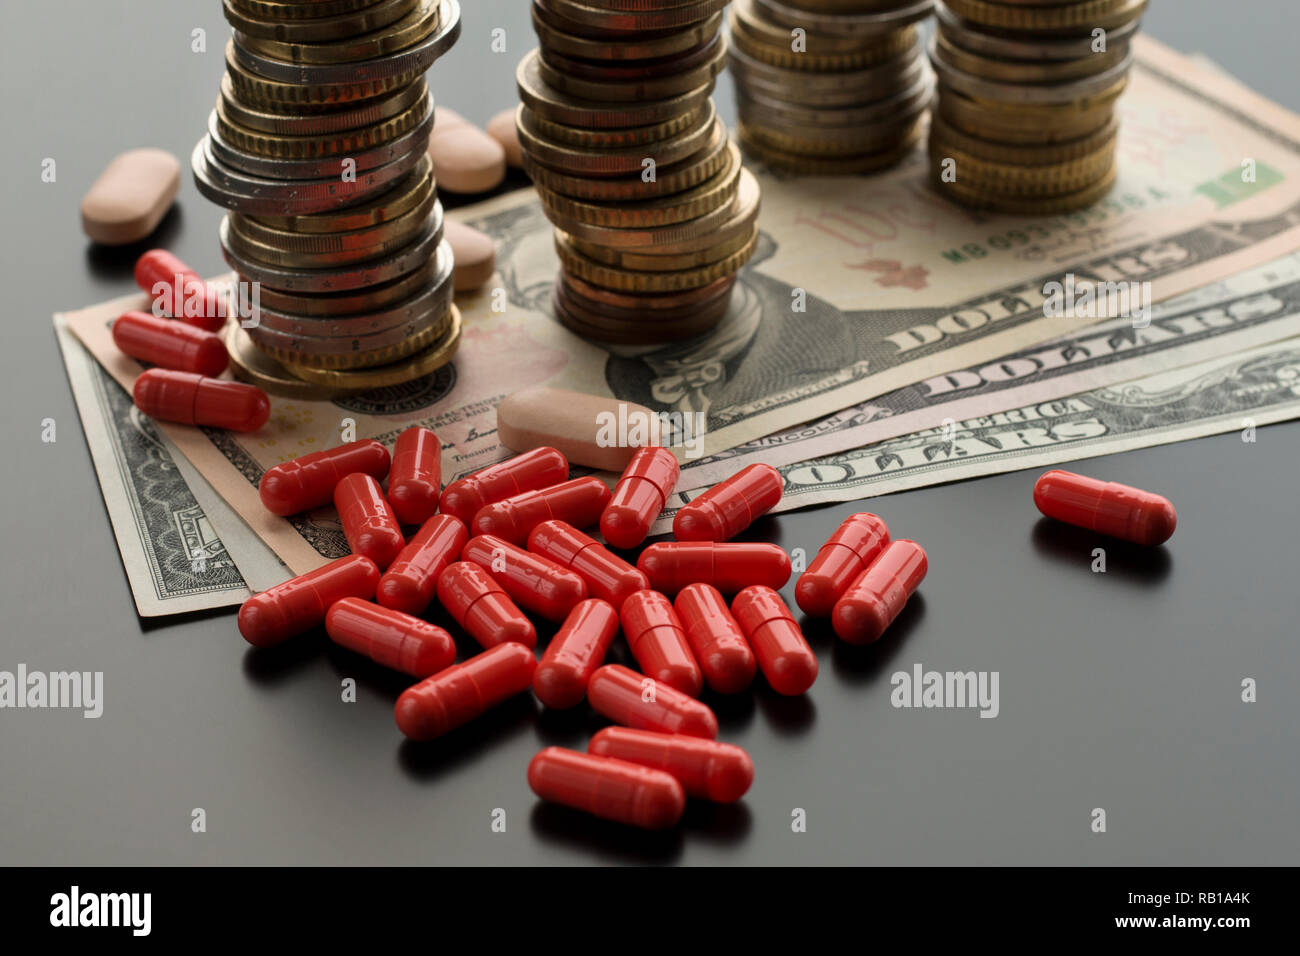 Red pills or capsules against dollar bills and stacks of coins on the dark background. Concept of costly treatment Stock Photo